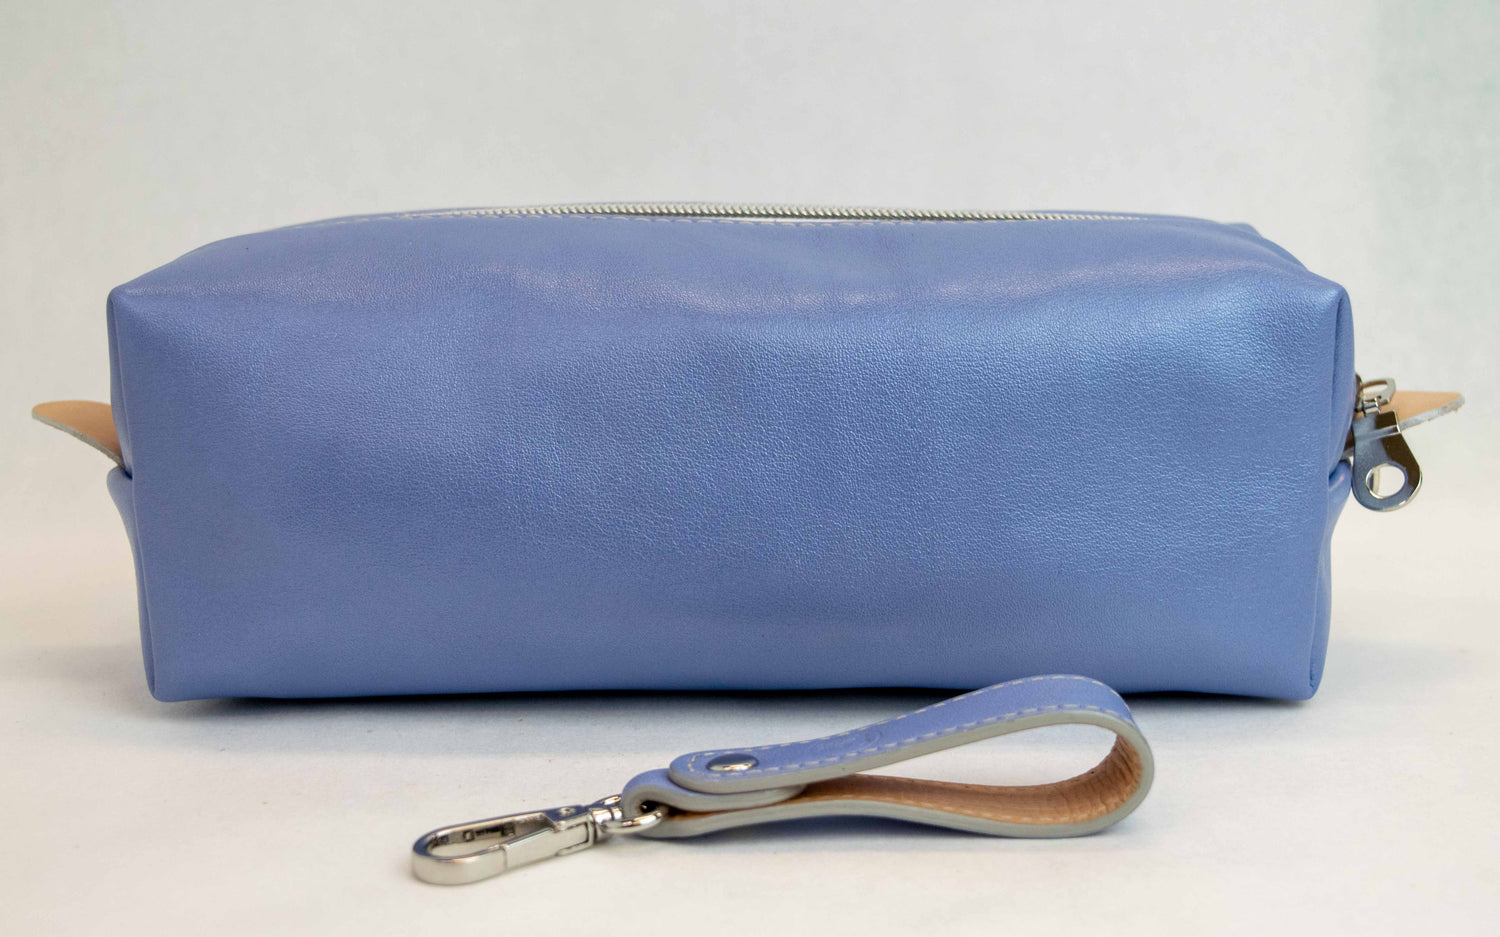 Back view of T5 bath dopp kit toiletry wash bag designer handcrafted of smooth calf leather in light Periwinkle blue.